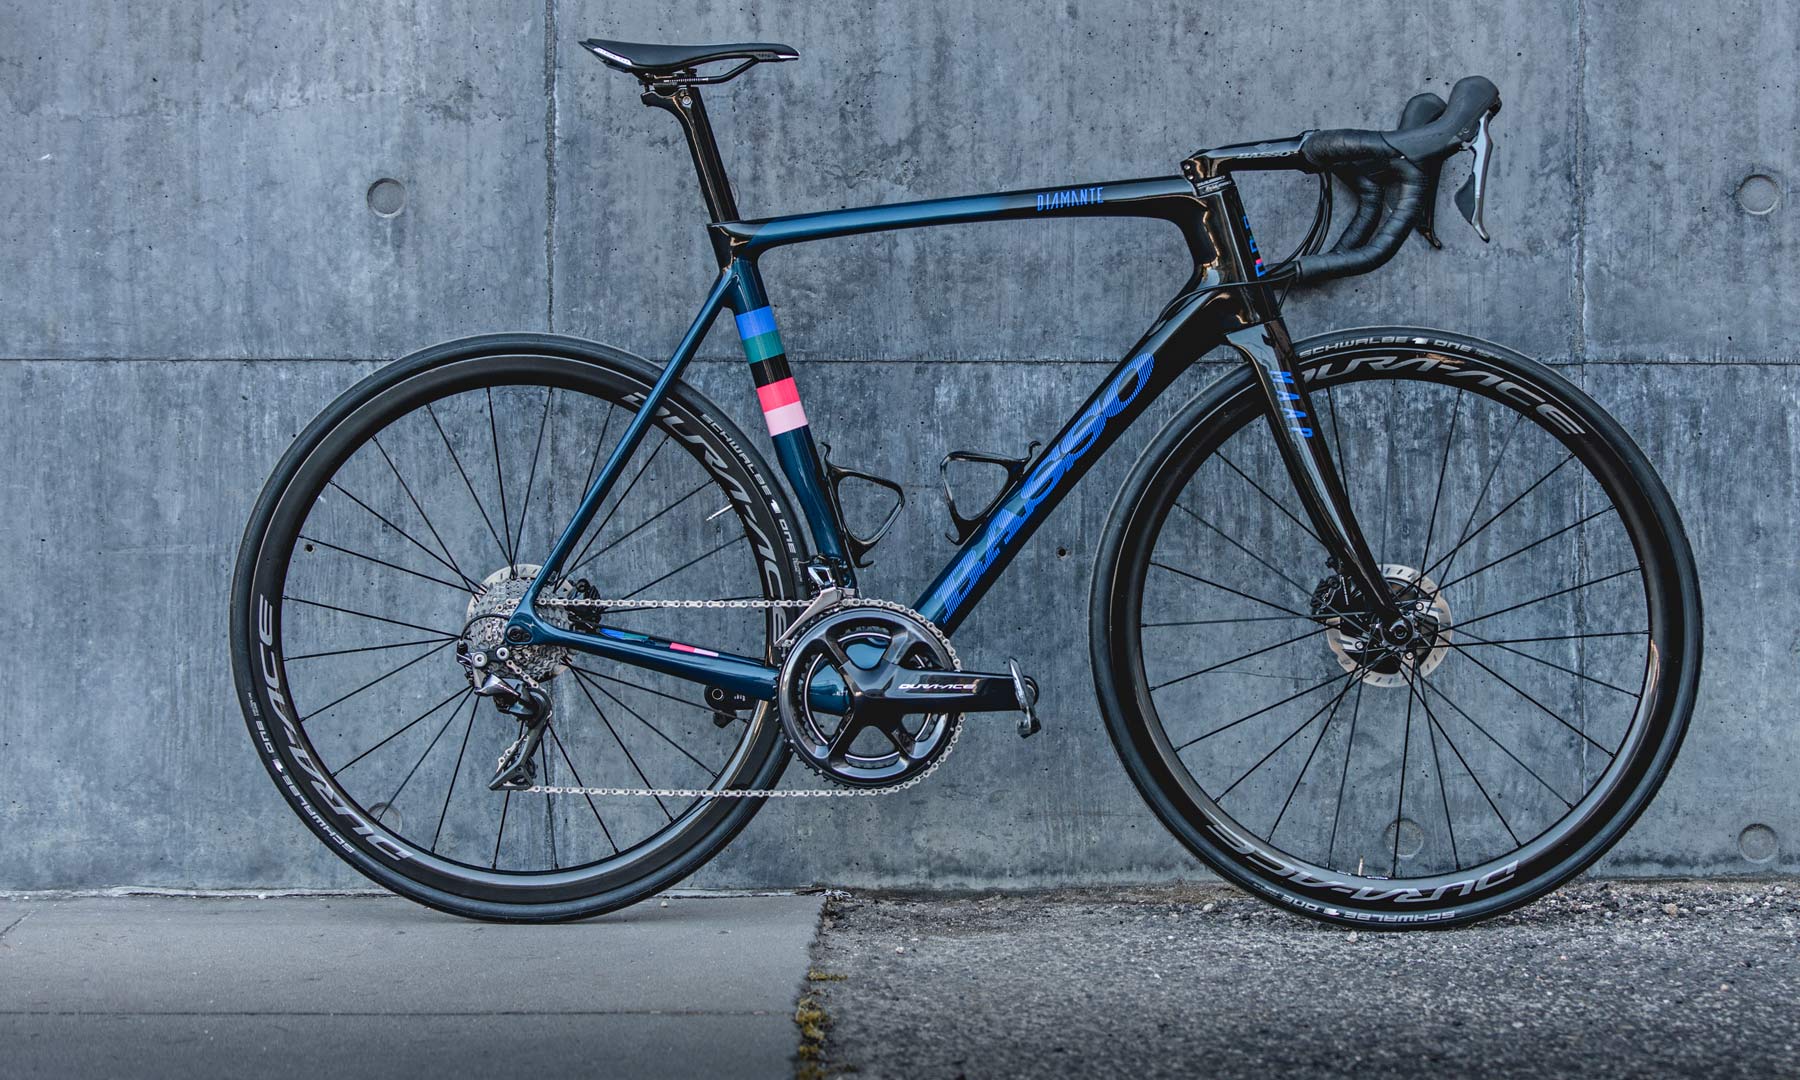 MAAP x Basso Diamante fades in limited team edition carbon road bike